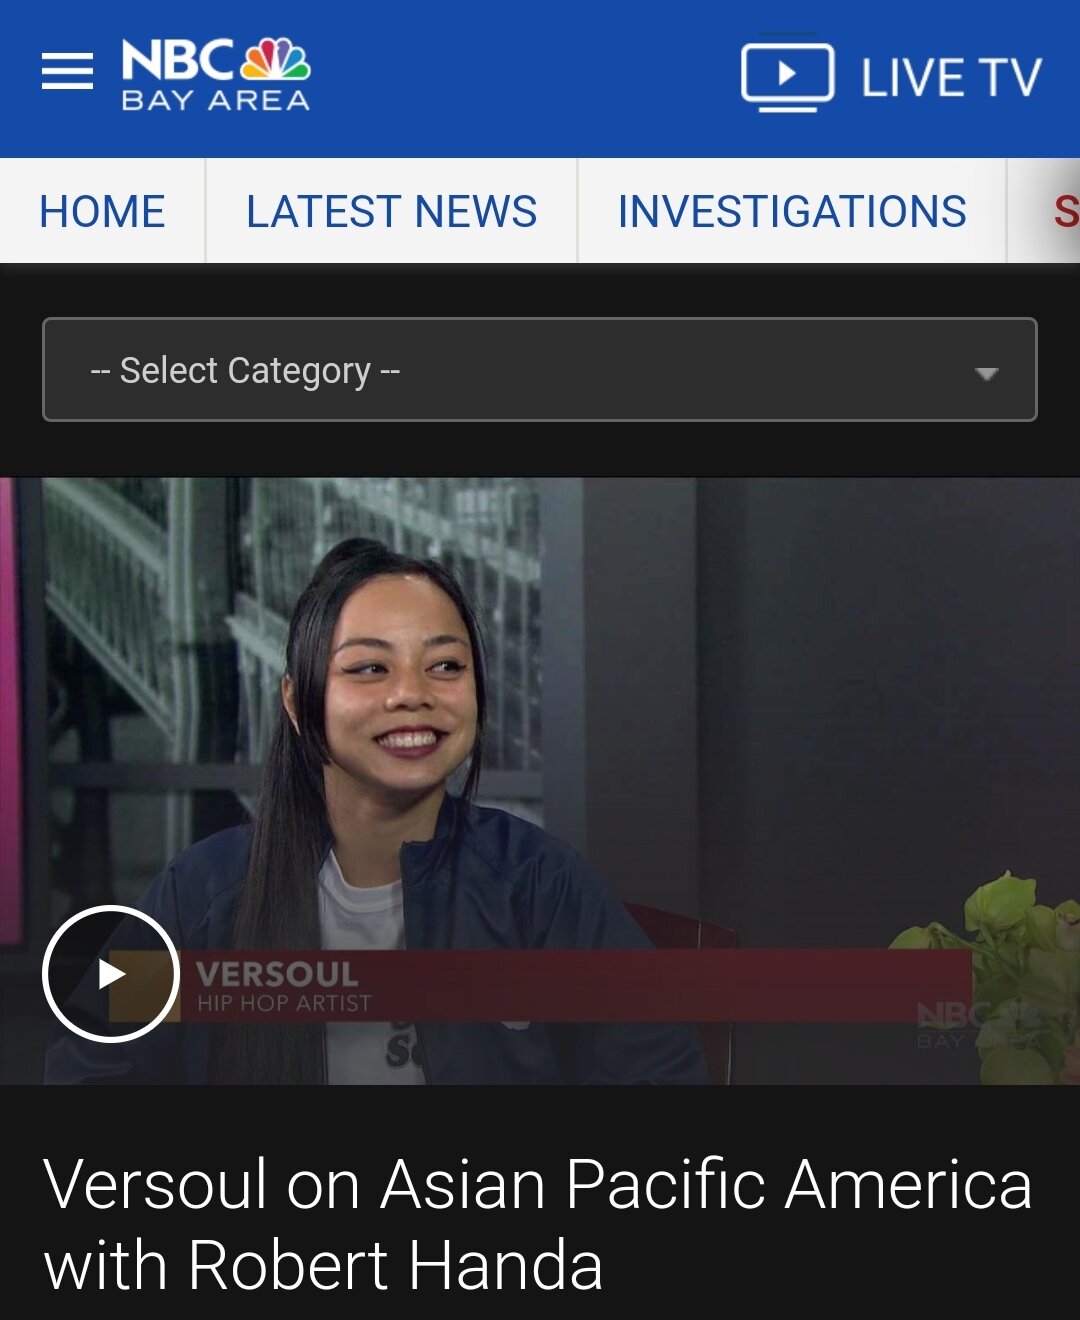 Copy of Versoul on Asian Pacific America with Robert Handa